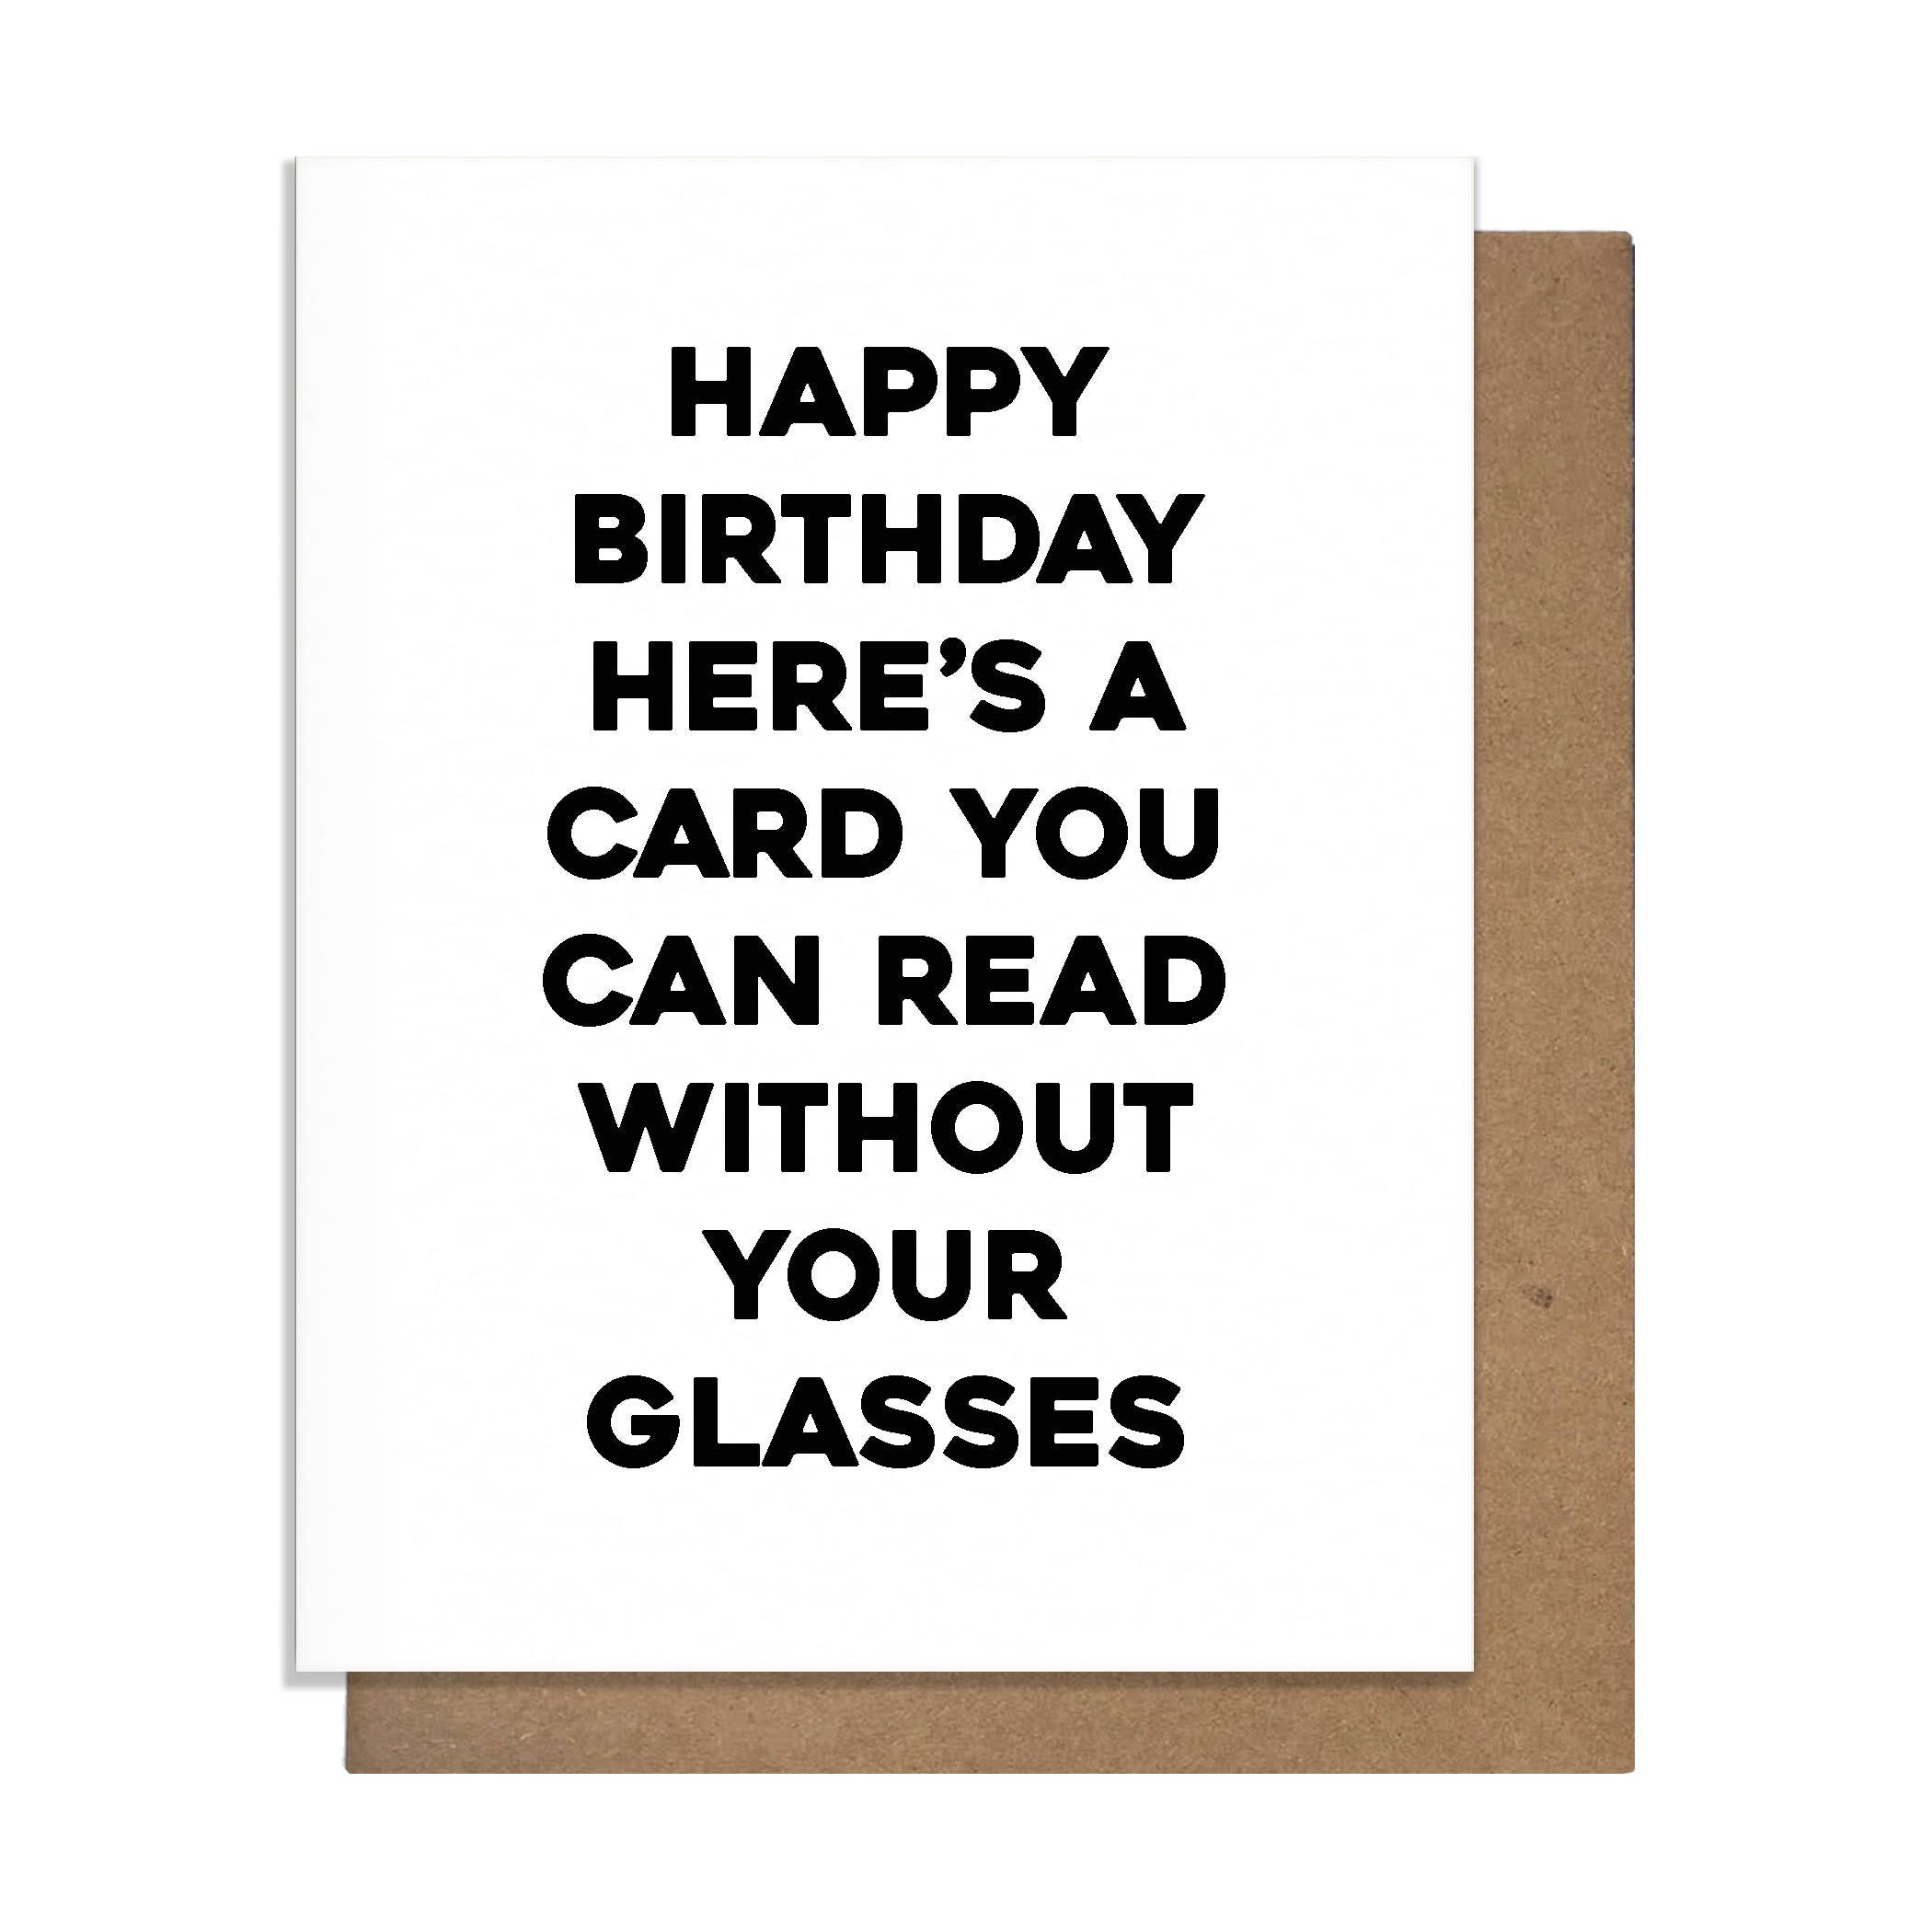 Pretty Alright Goods - Happy Birthday - Read Without Your Glasses